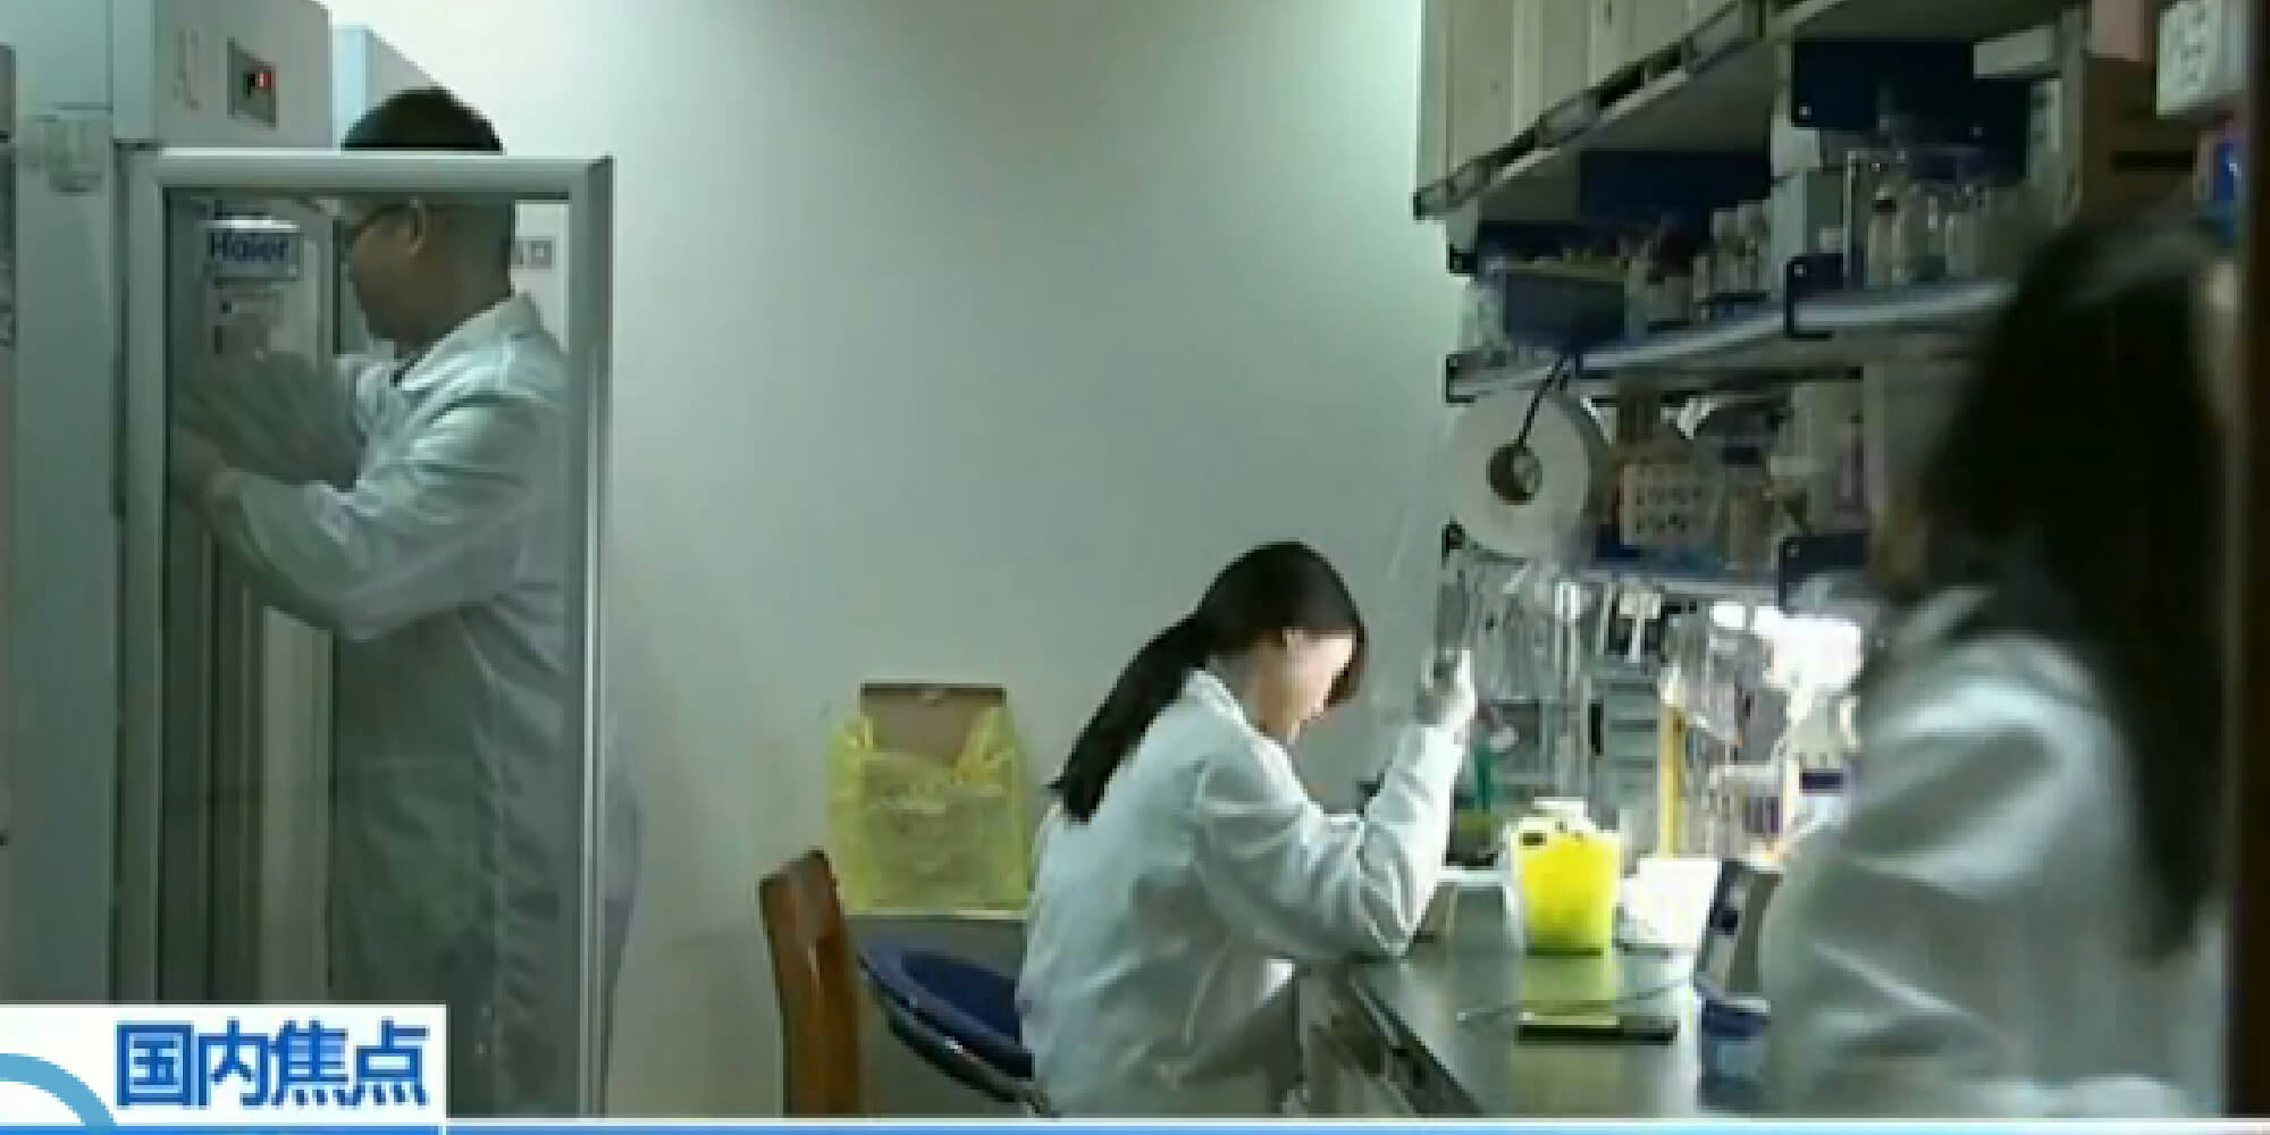 SADS-CoV research video released by Chinese state media